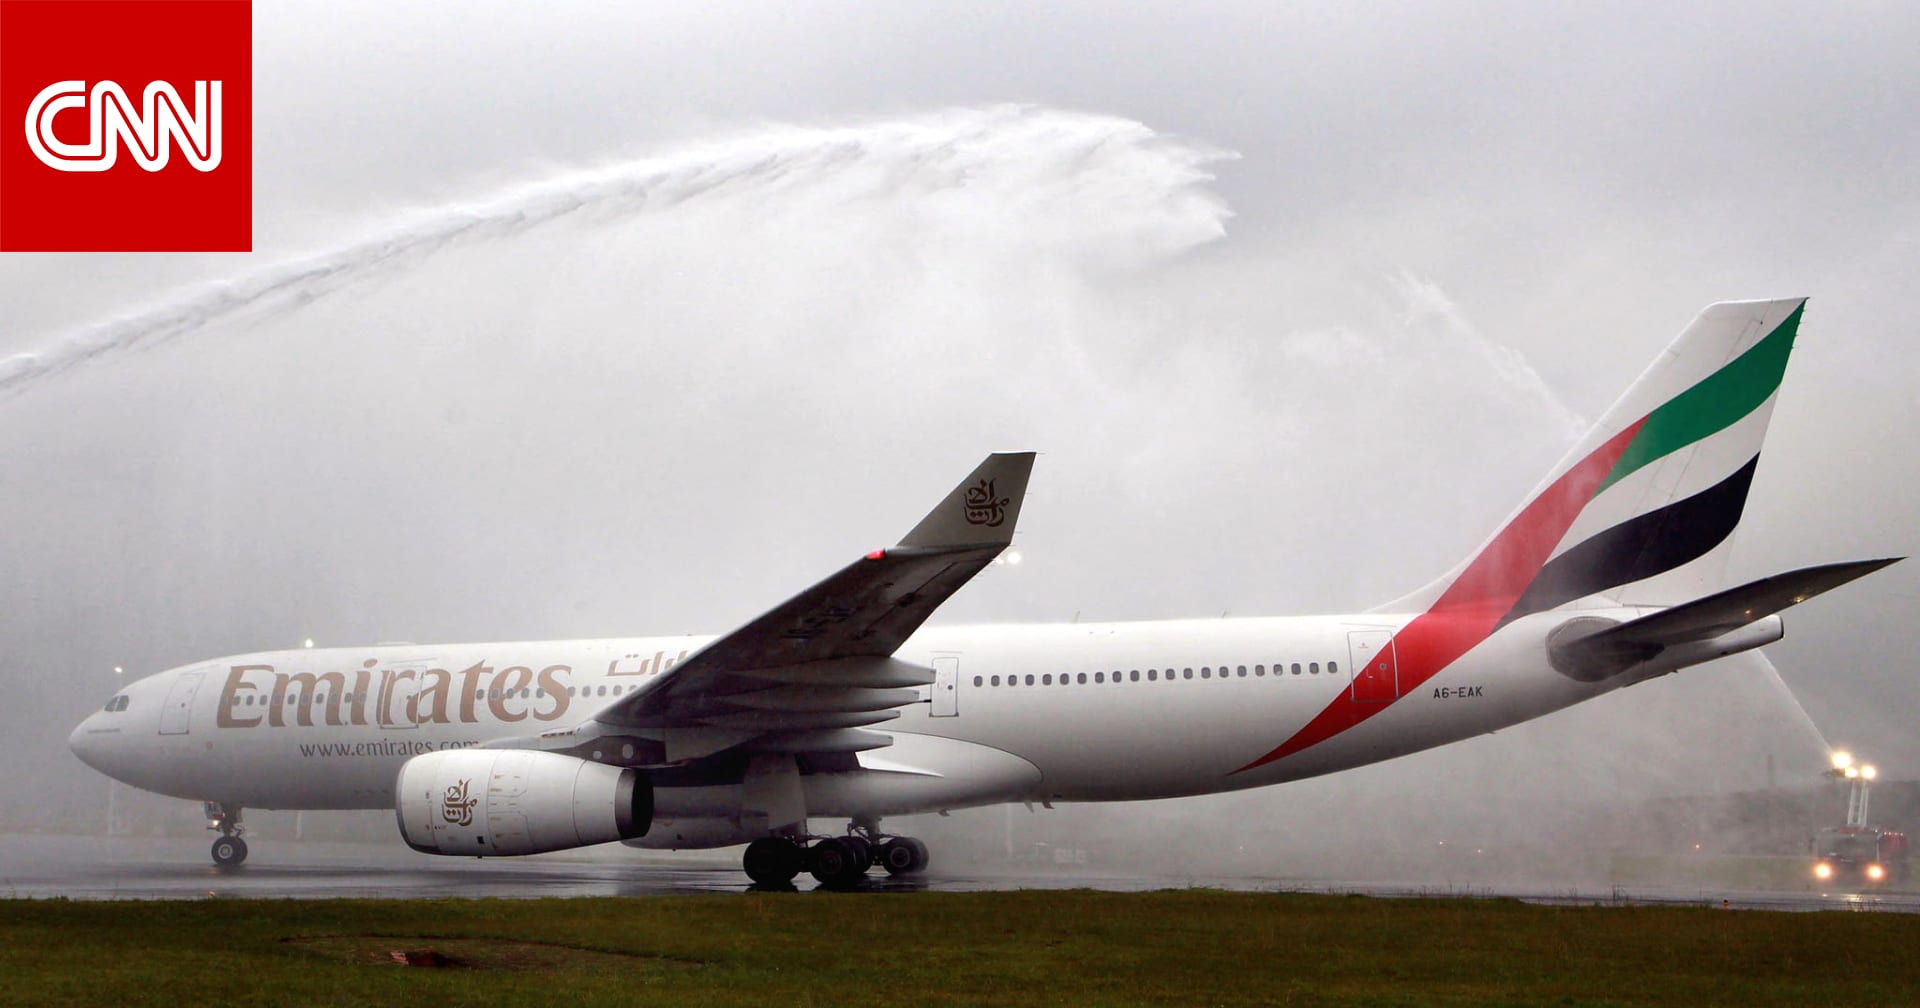 Emirates has suspended flights to 9 US airports